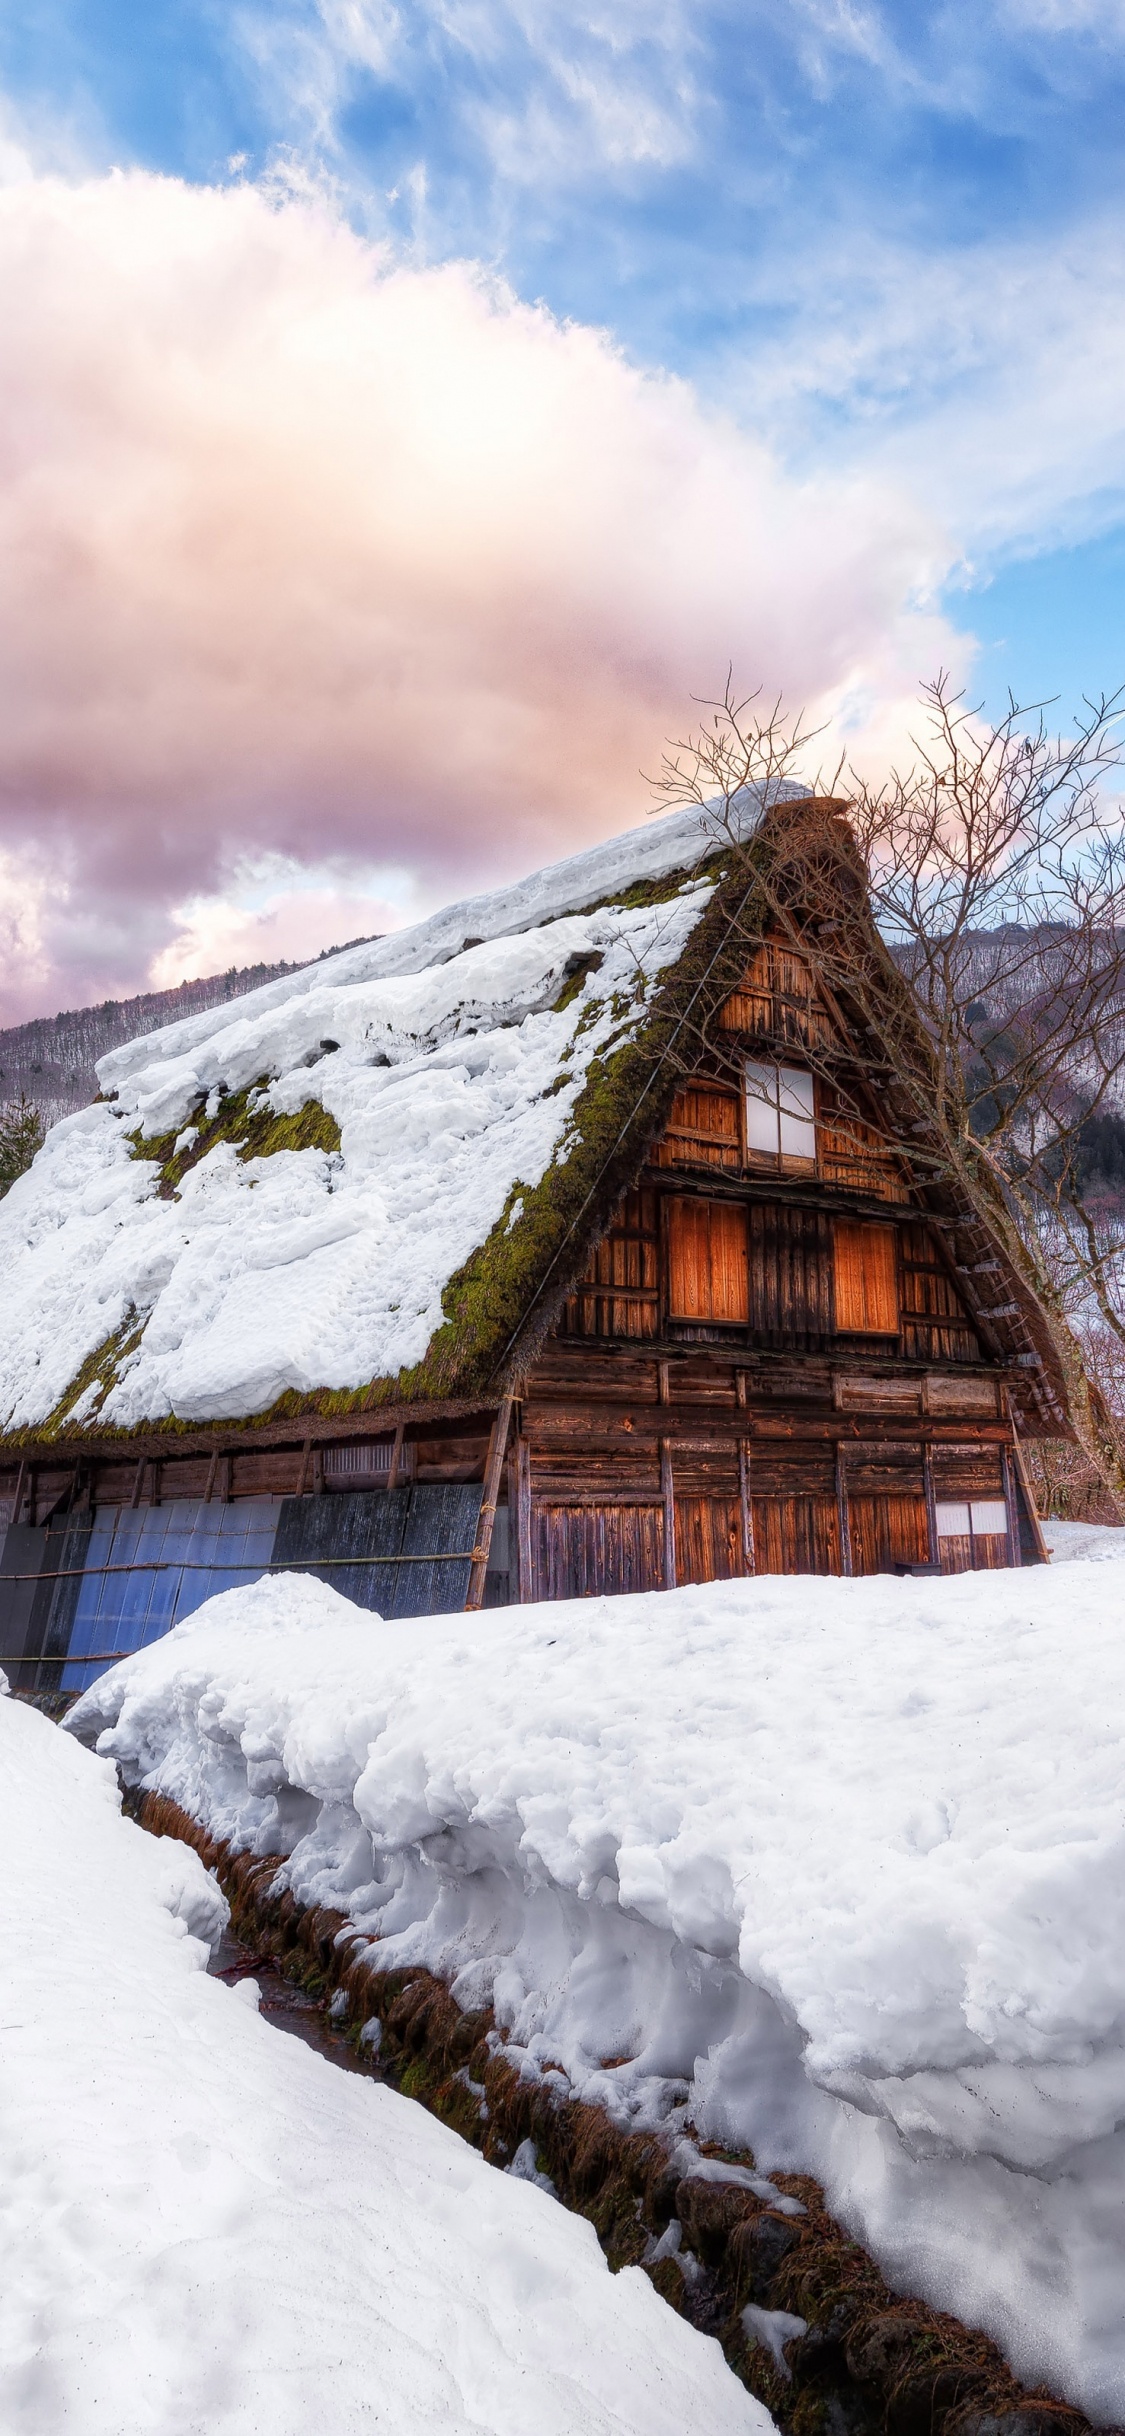 Brown Wooden House on Snow Covered Ground Under White Clouds and Blue Sky During Daytime. Wallpaper in 1125x2436 Resolution